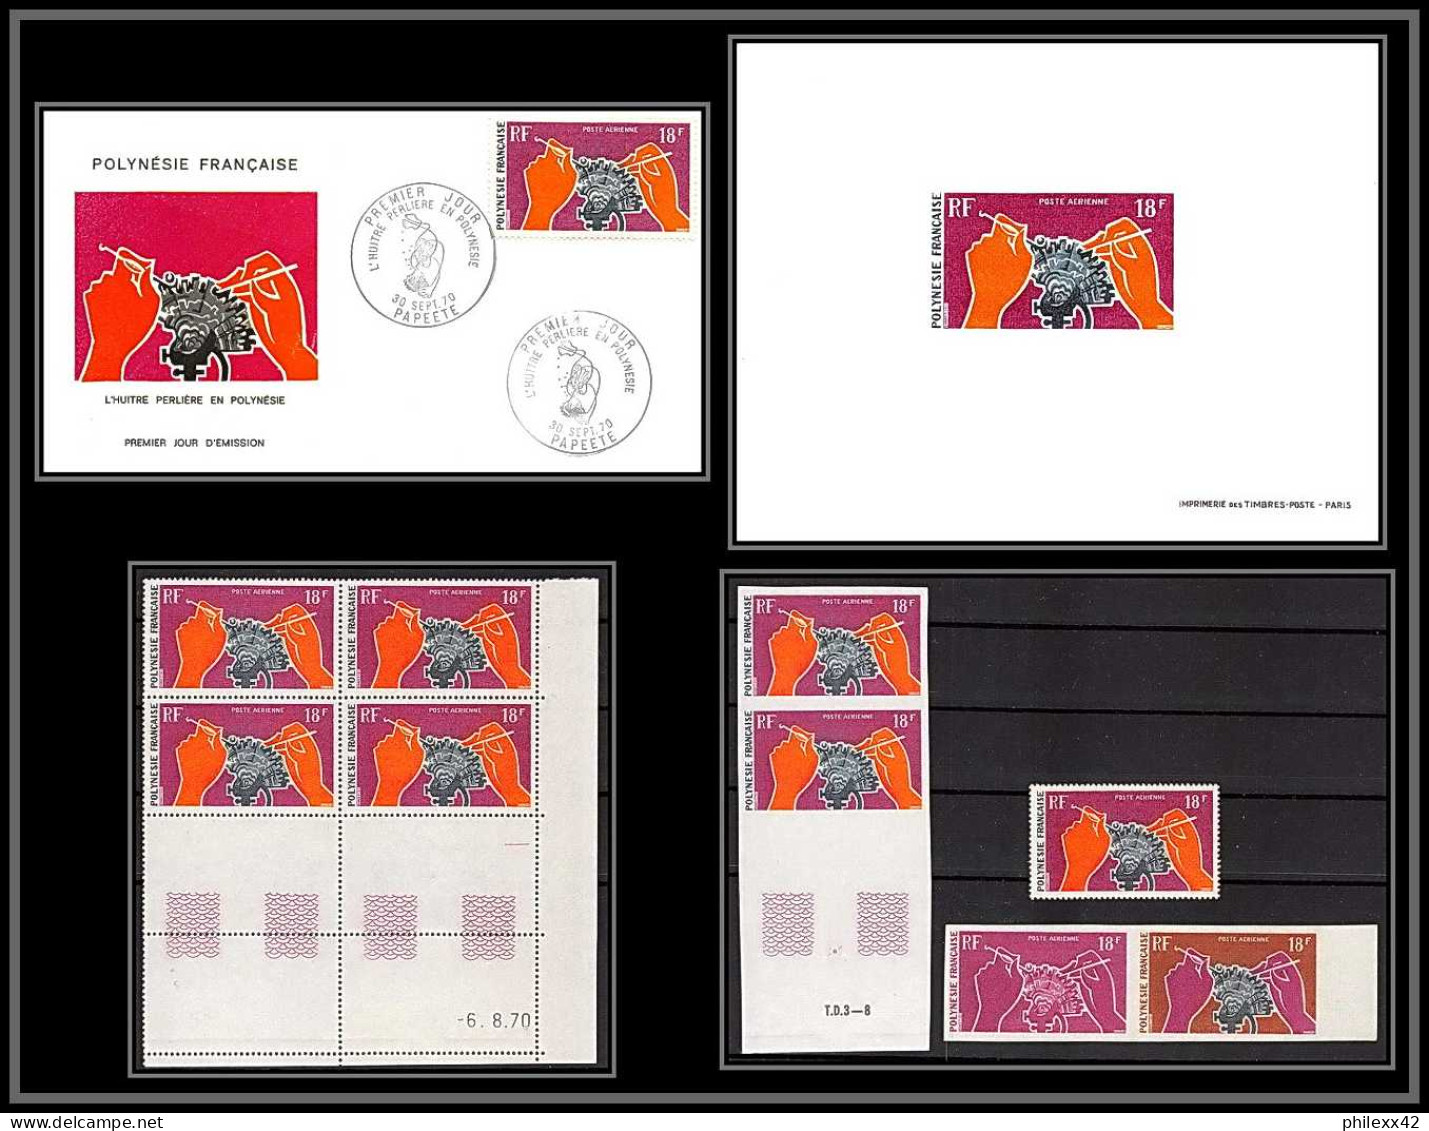 91986 Polynesie N°37 Huitre Oyster Coquillage Shell Essai Proof Non Dentelé Imperf ** MNH Fdc épreuve De Luxe Proof  - Imperforates, Proofs & Errors